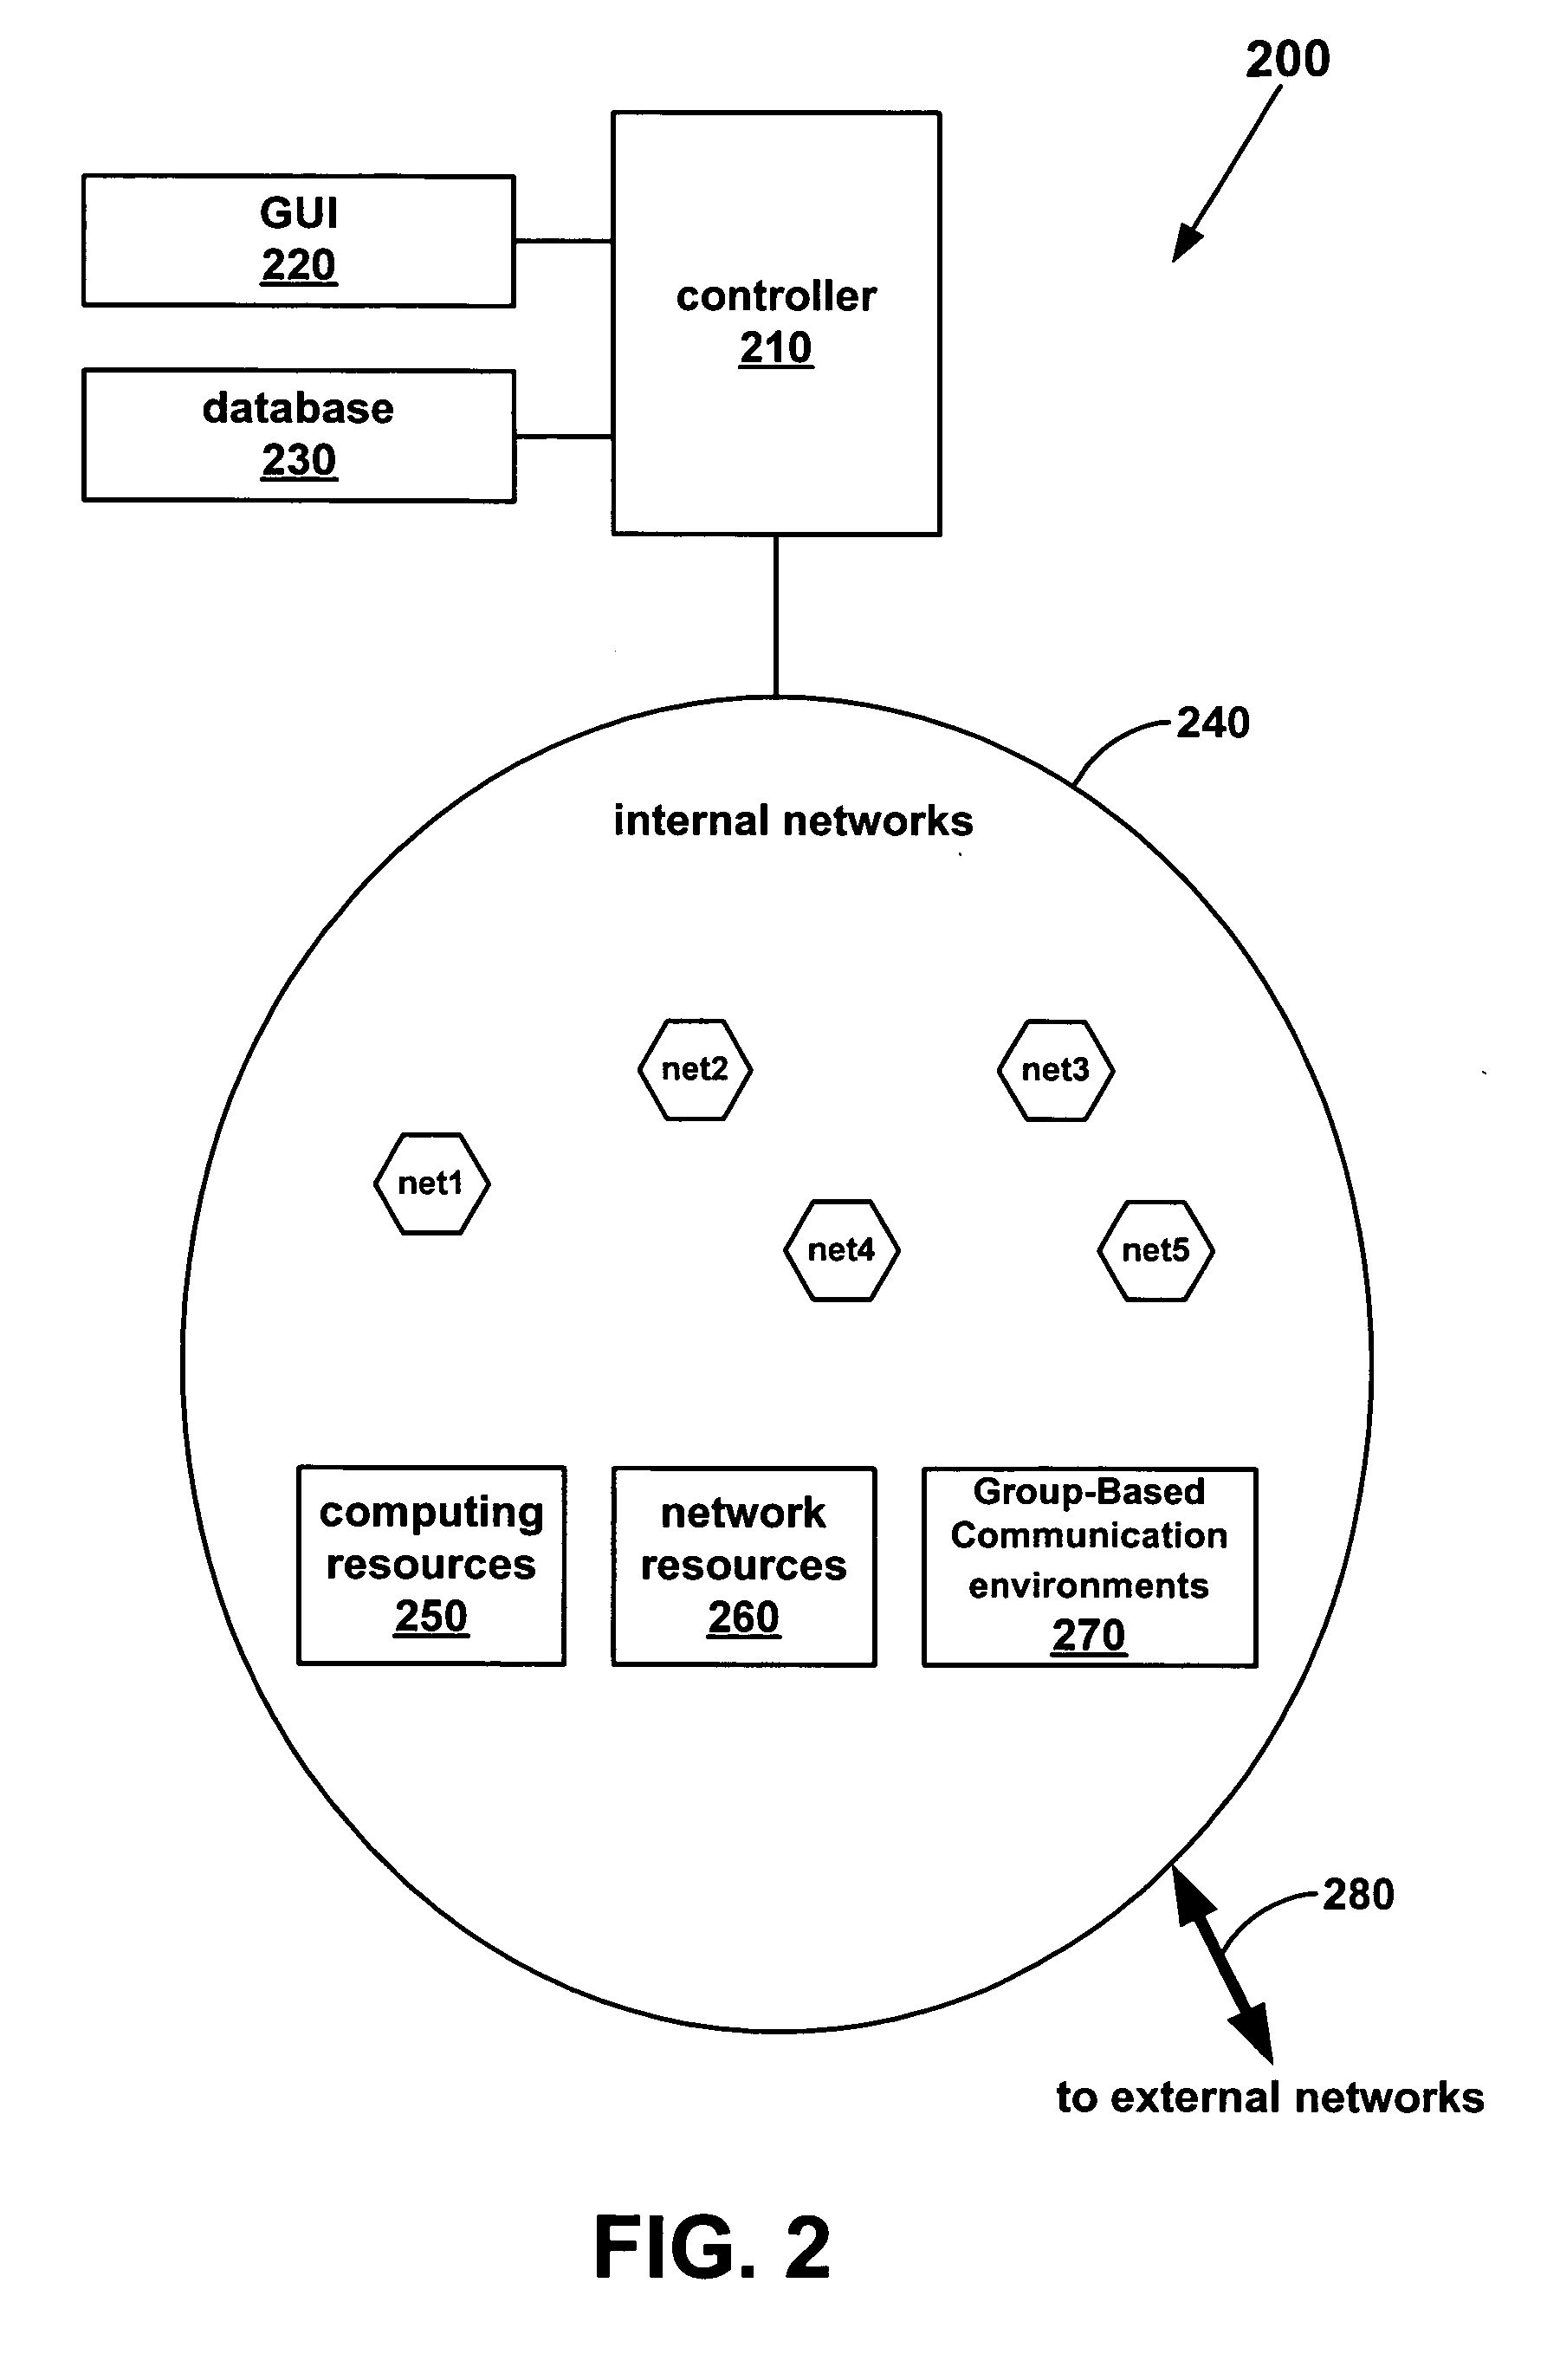 Dynamic source authentication and encryption cryptographic scheme for a group-based secure communication environment